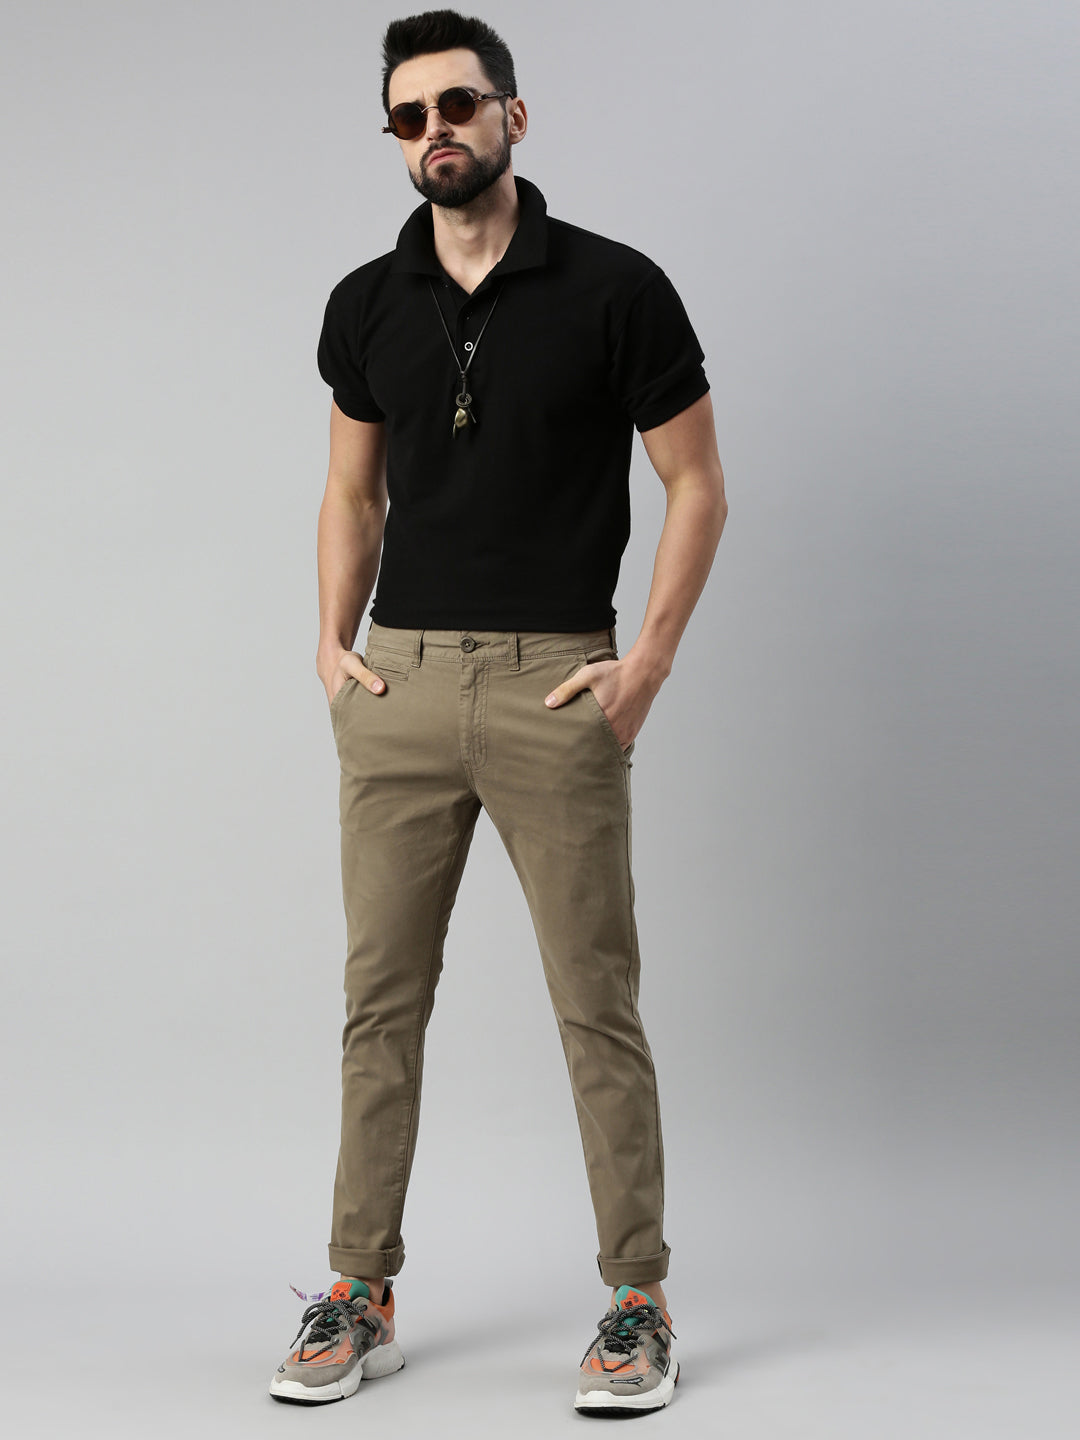 A Man in Black Shirt and Brown Pants · Free Stock Photo